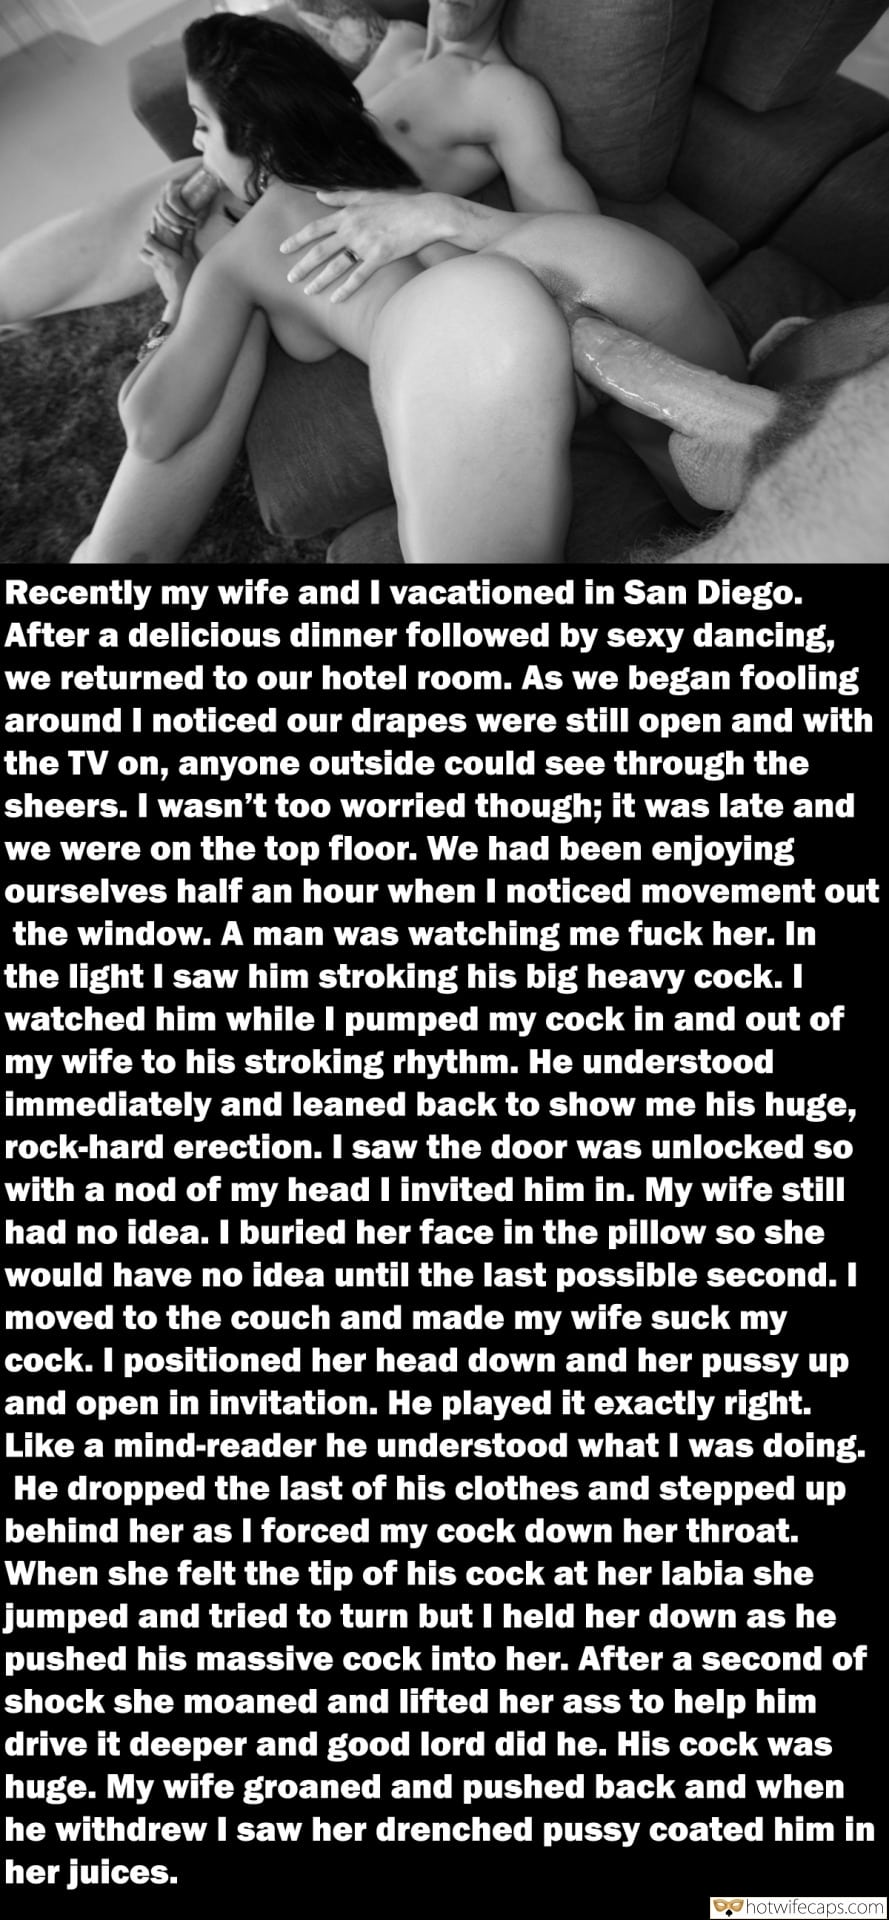 Monster cock story